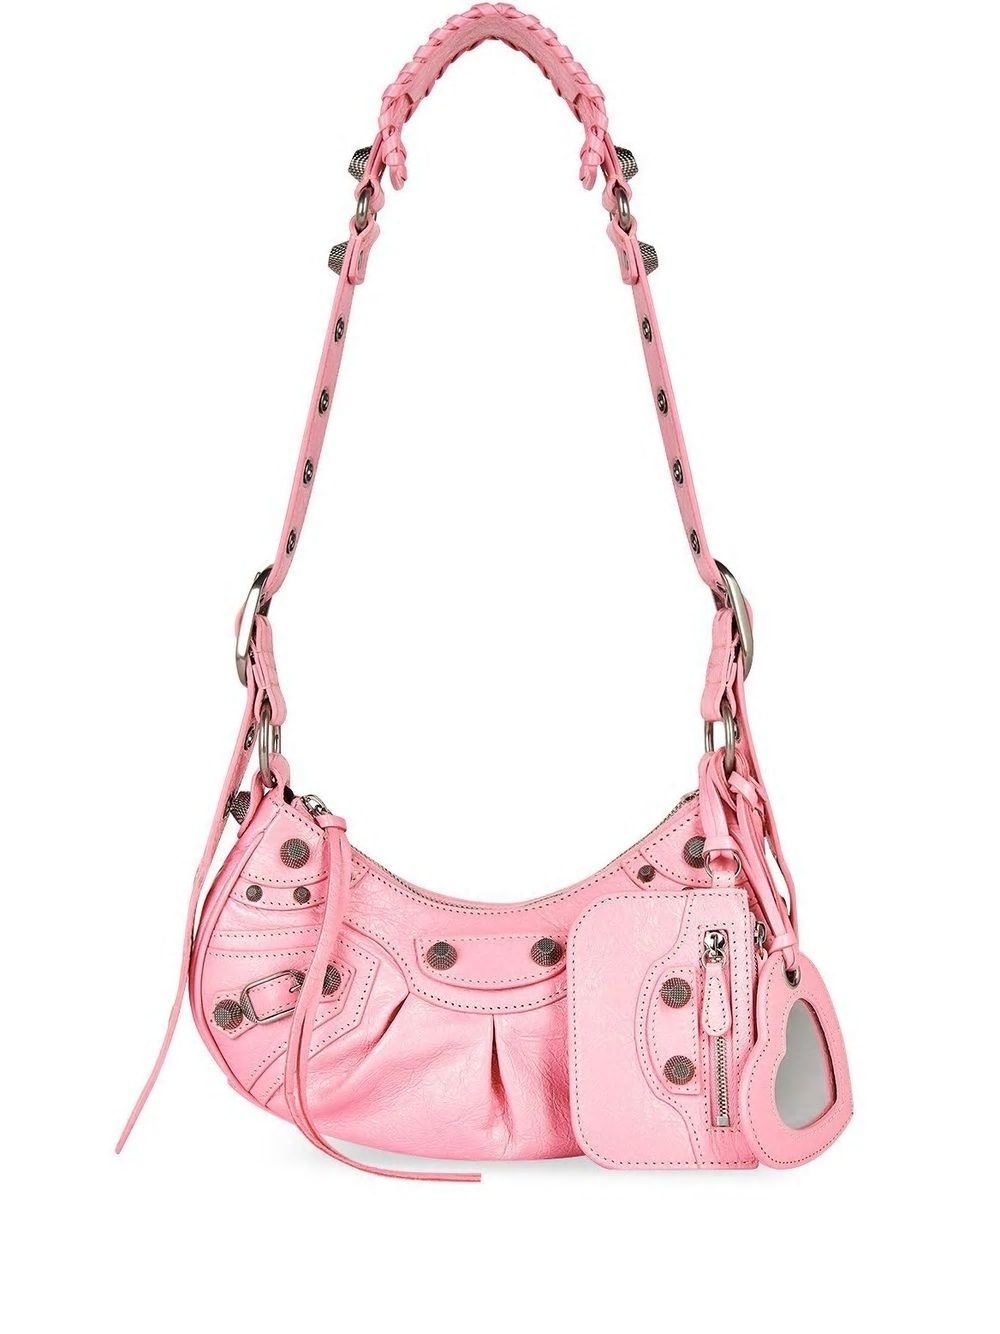 Crossbody Bag for Women with Decorative Studs and Removable Pouch